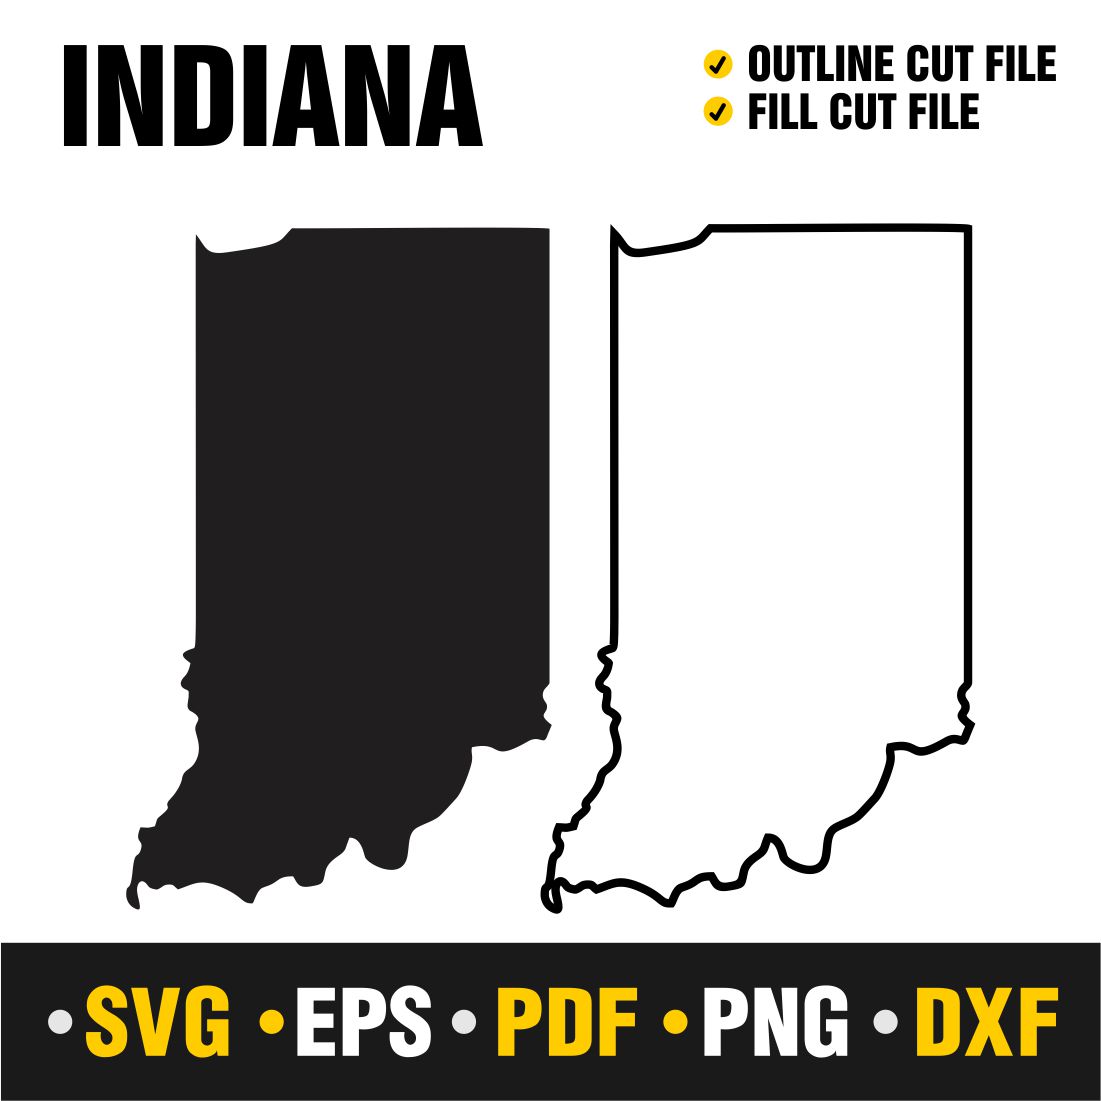 Indiana SVG, PNG, PDF, EPS & DXF cover image.